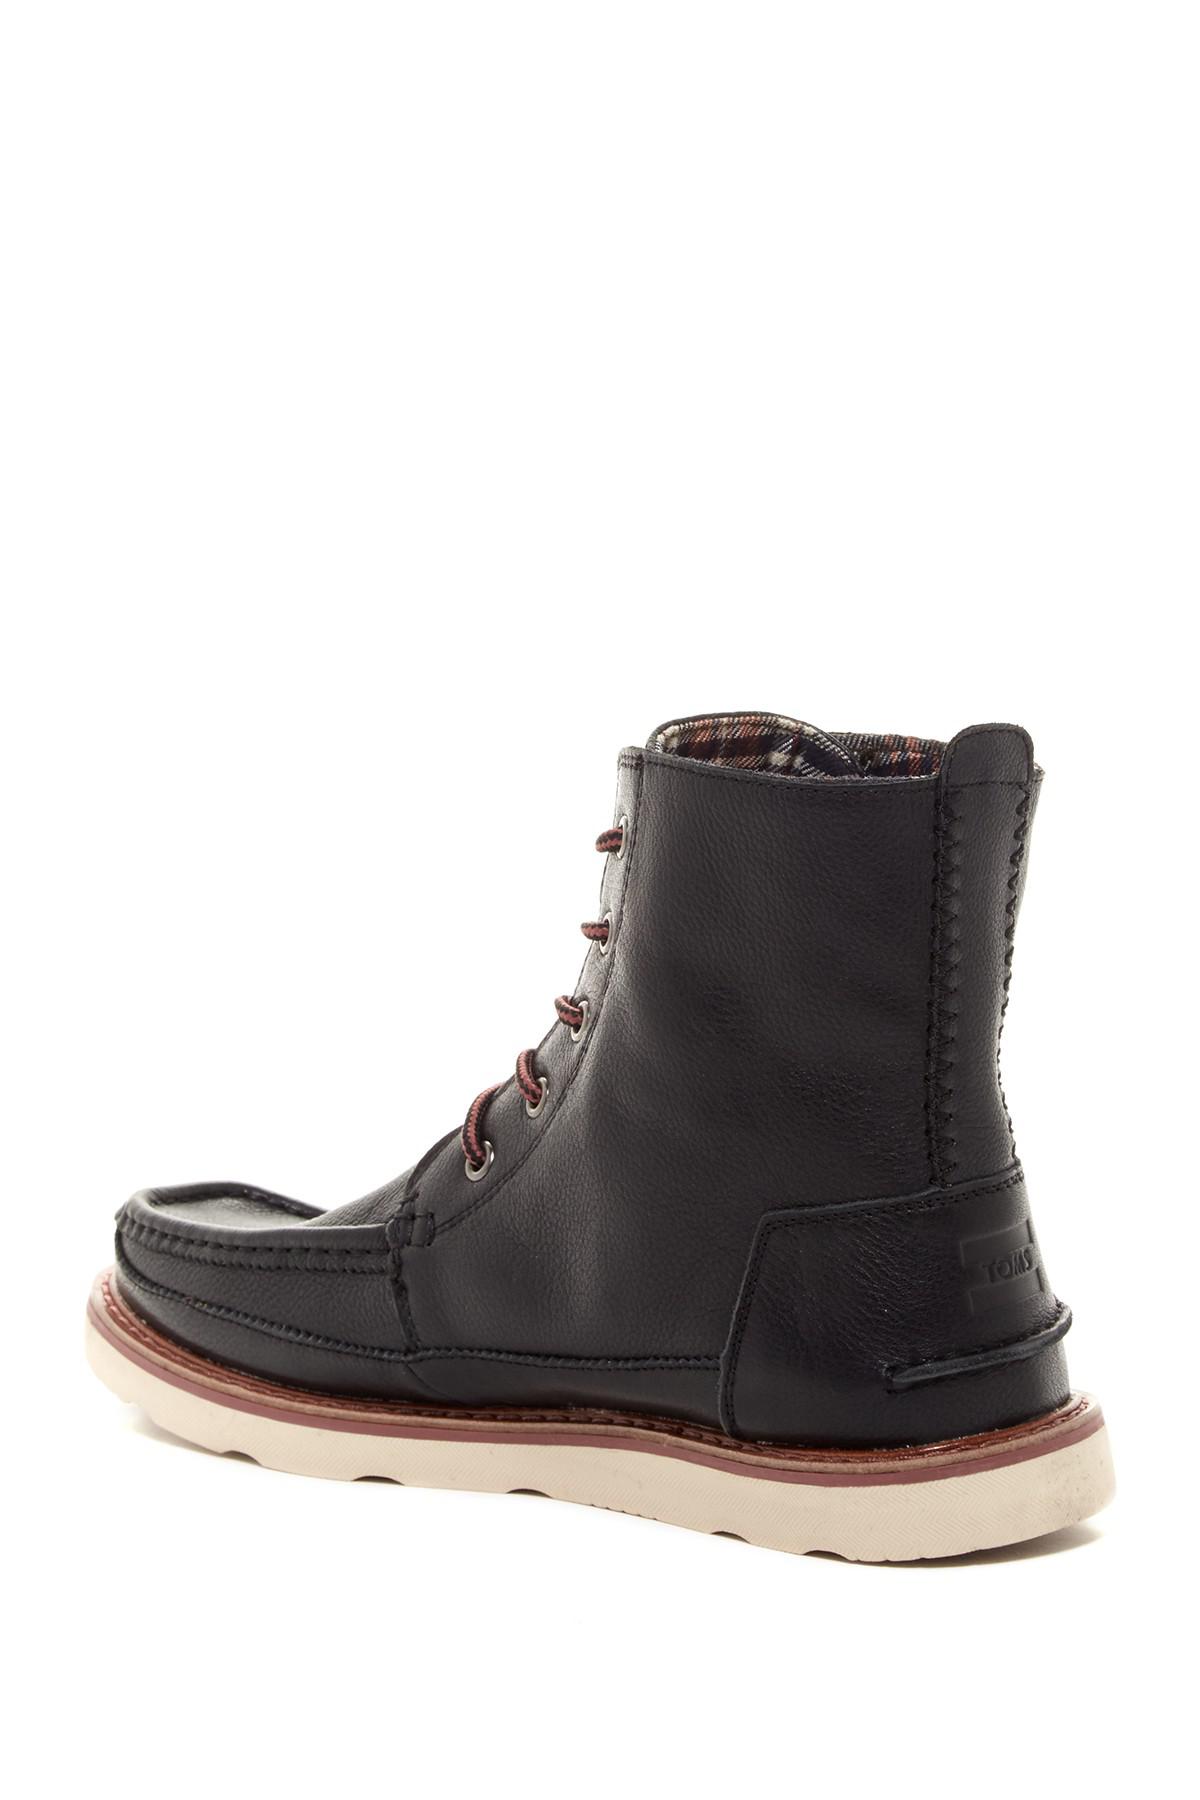 TOMS Leather 'searcher' Moc Toe Boot 